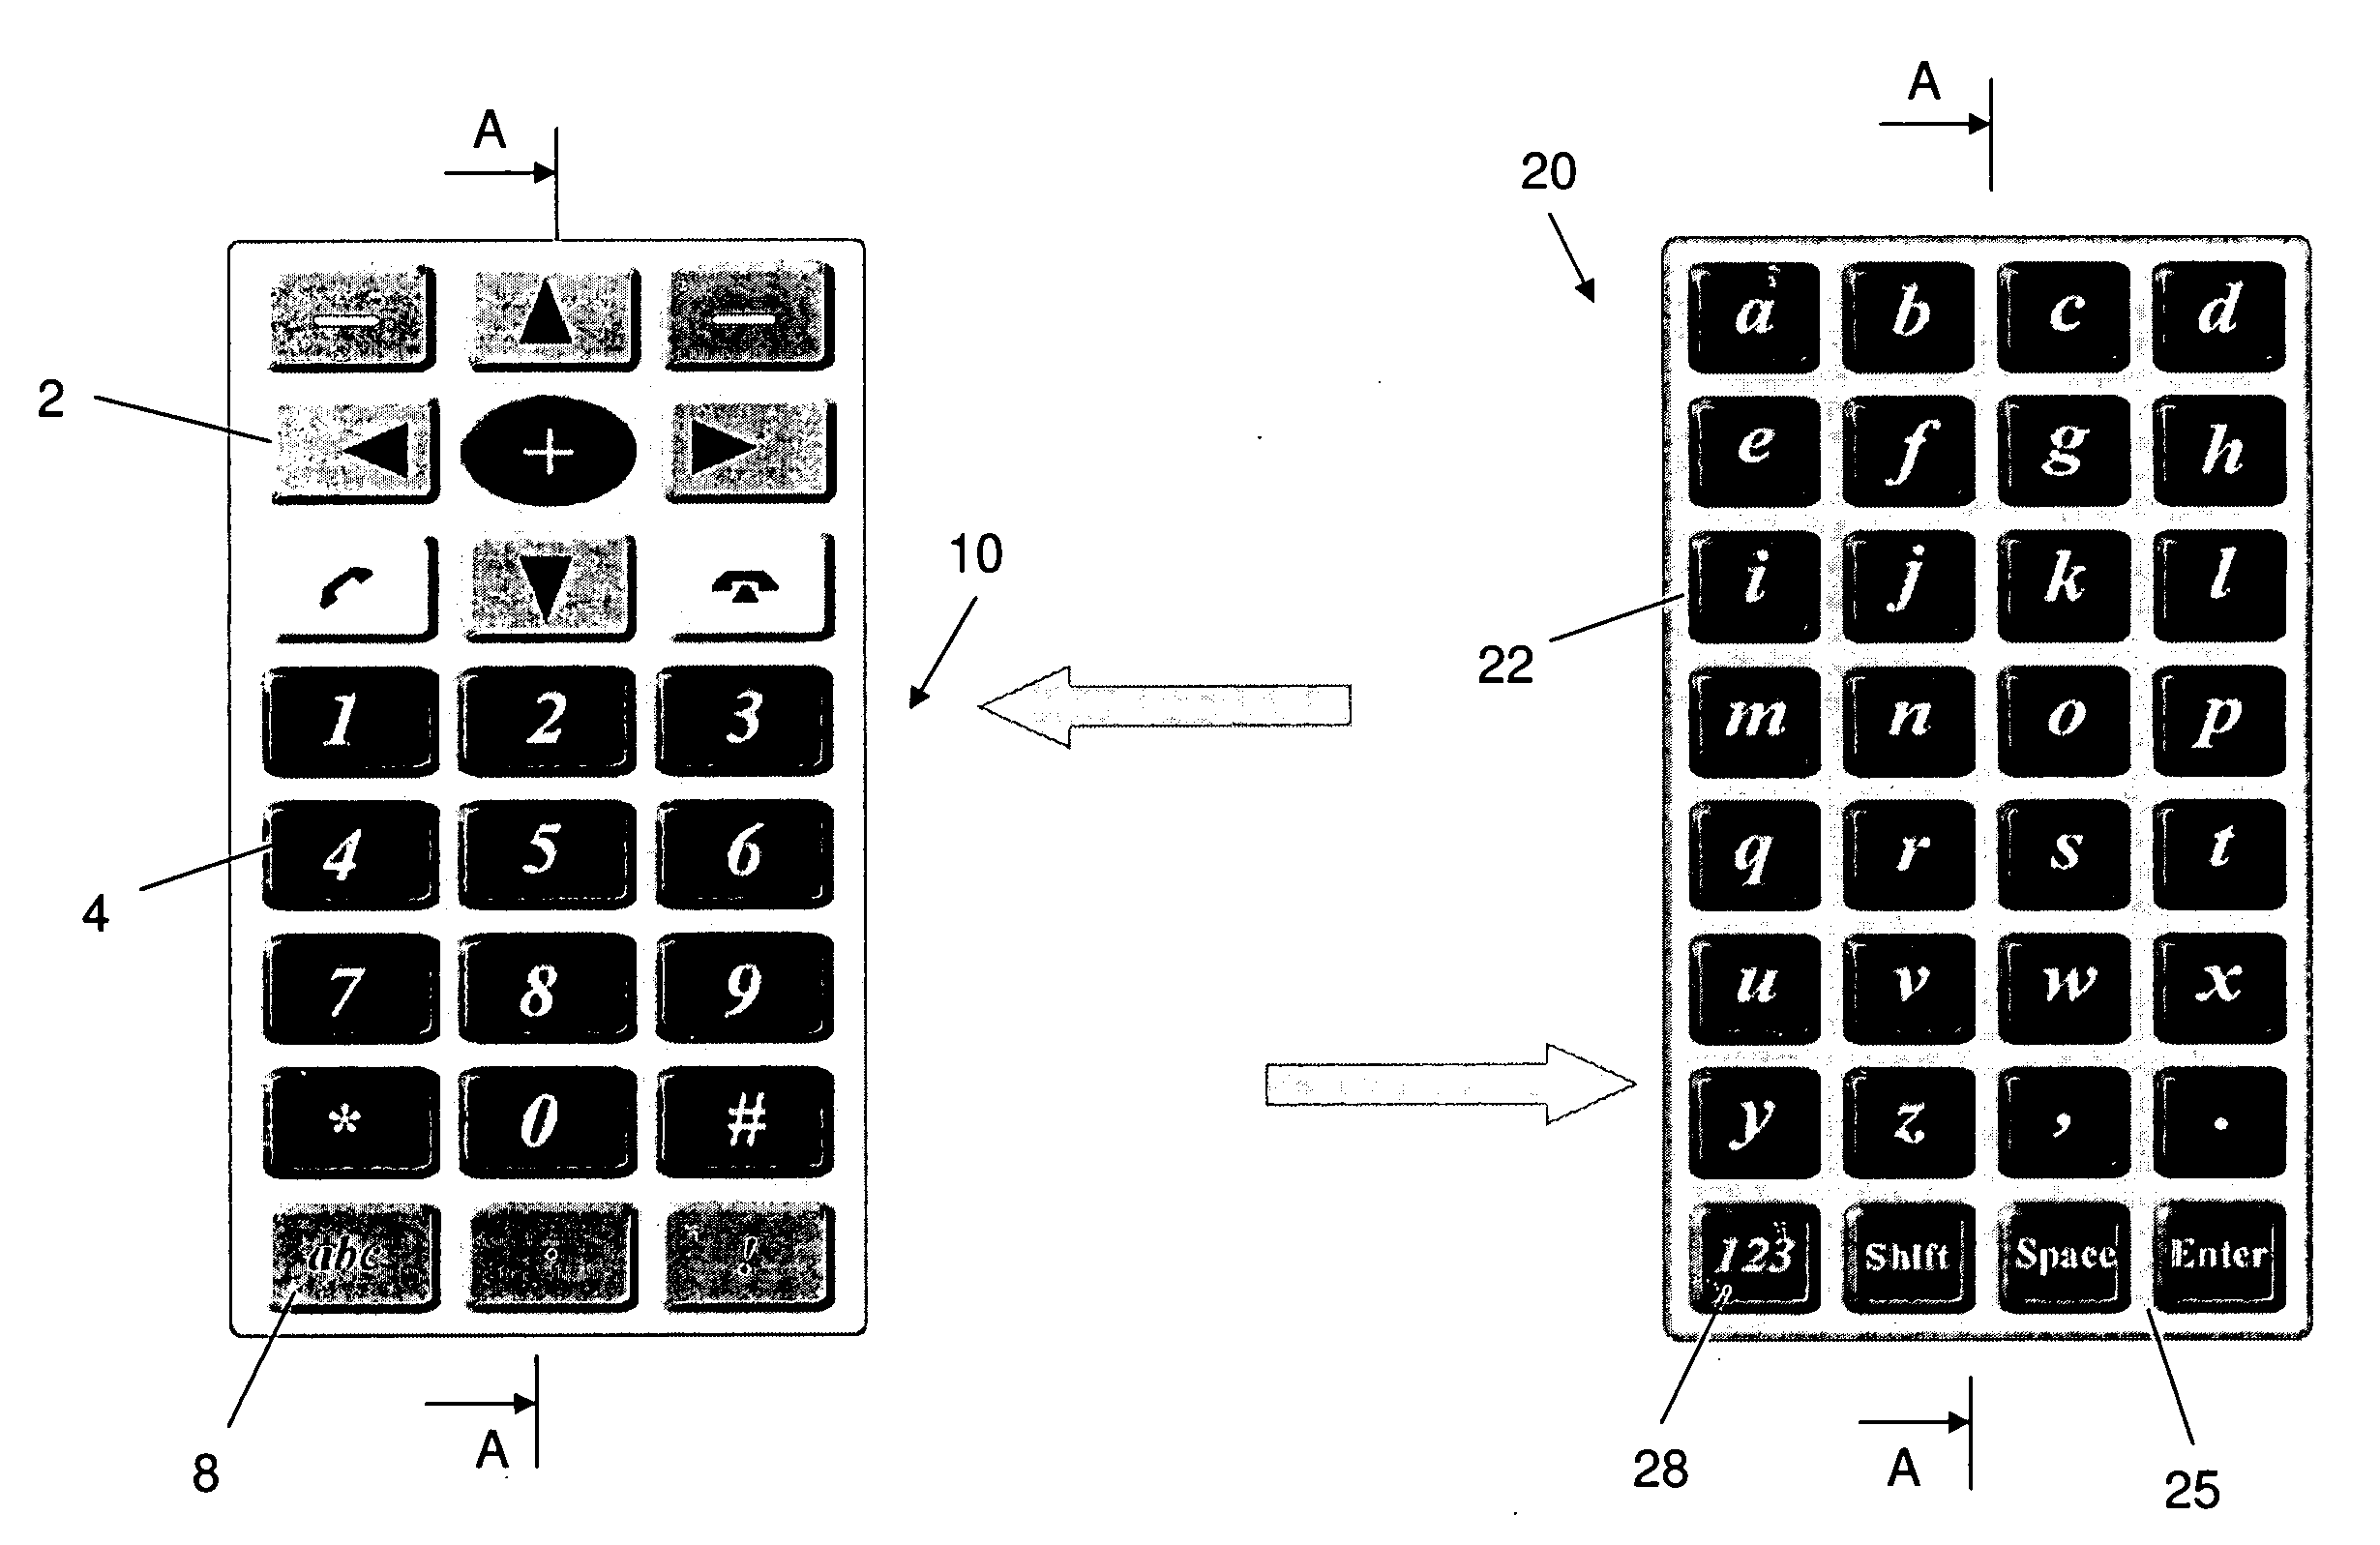 Variably displayable mobile device keyboard